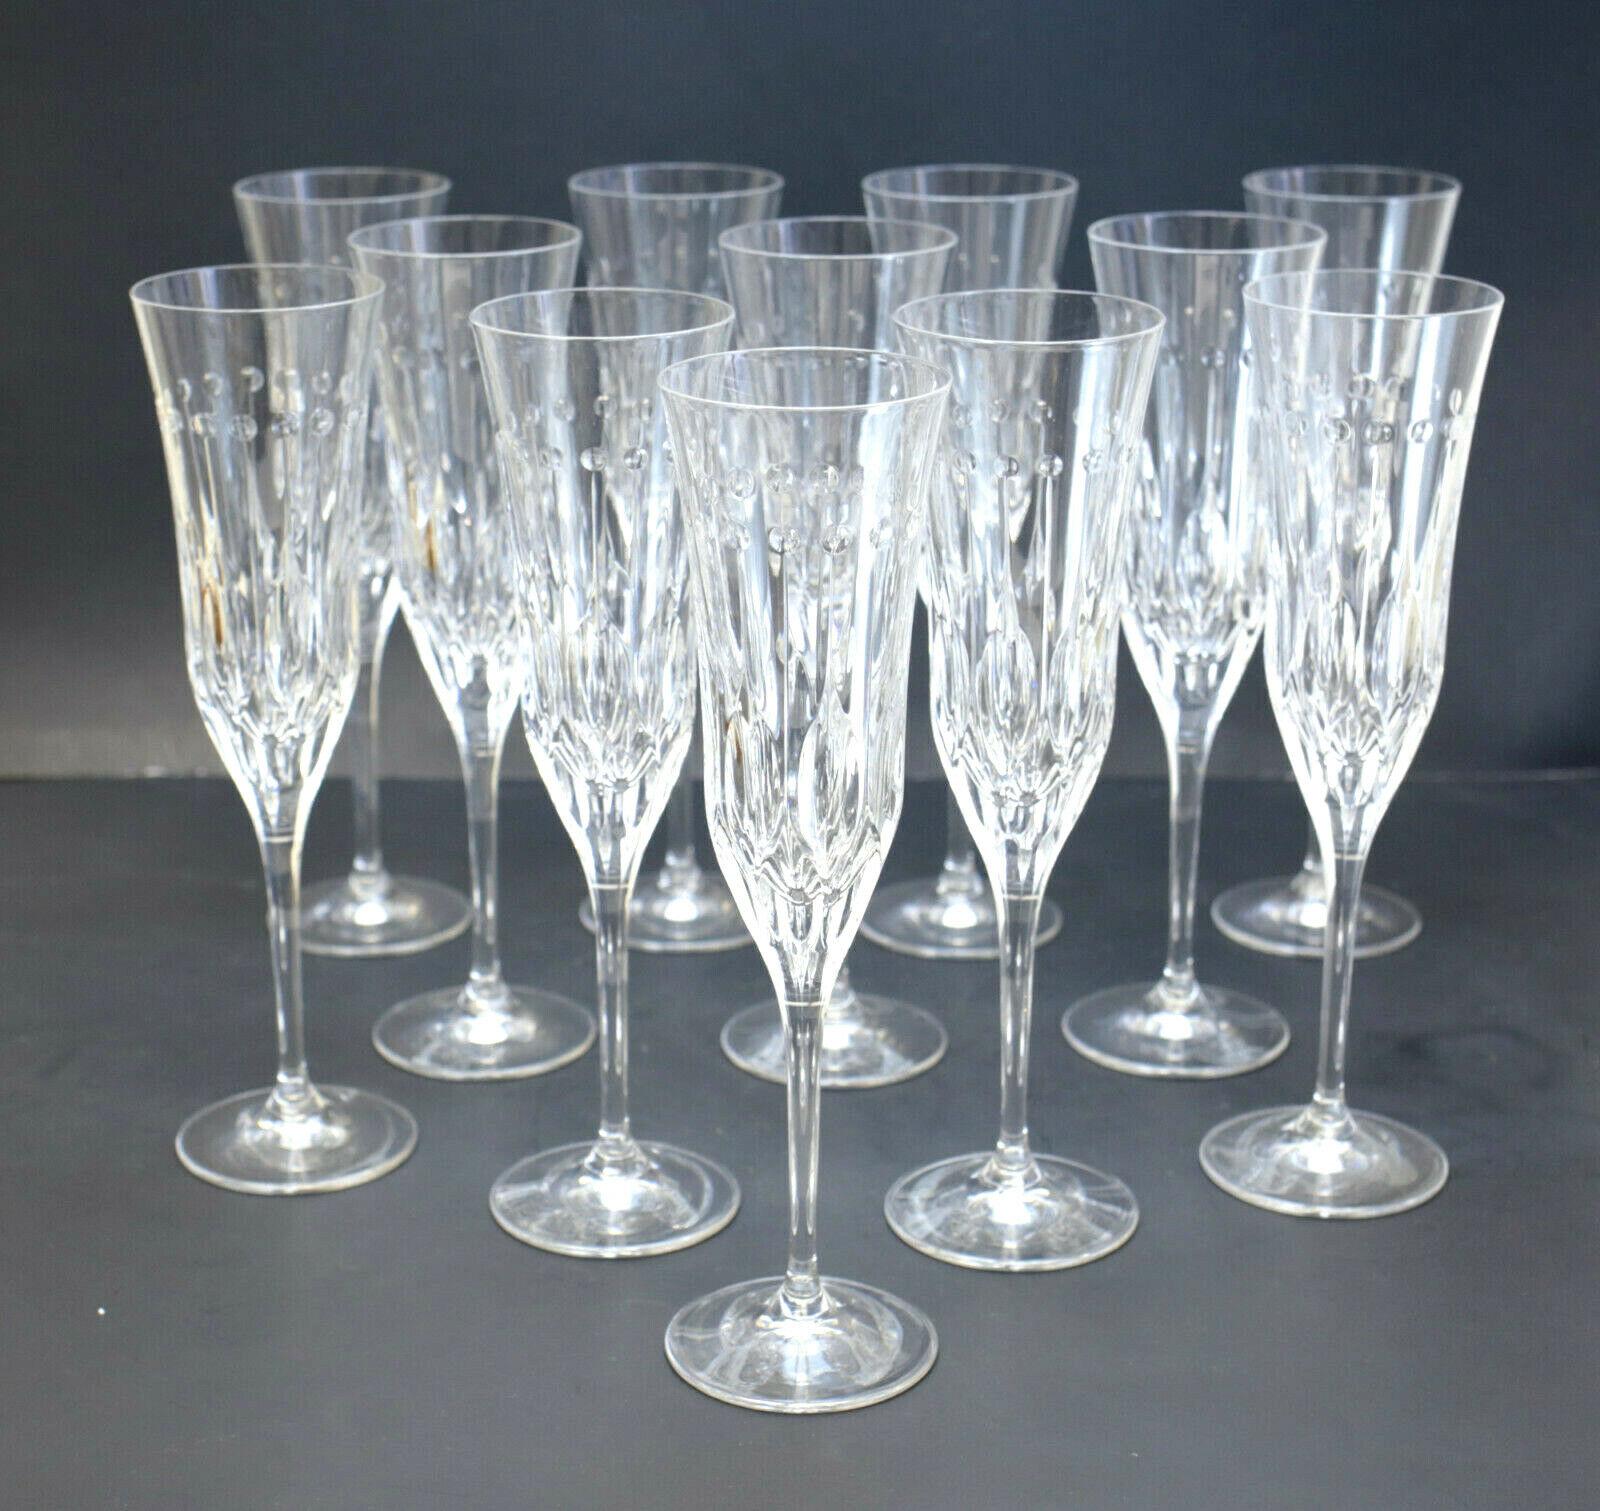 12 Varga Contemporary Cut Glass Clear Fluted Champagne Flutes in Renaissance

Modernist dots and vertical stripes to the bowl of the goblets. Incised 